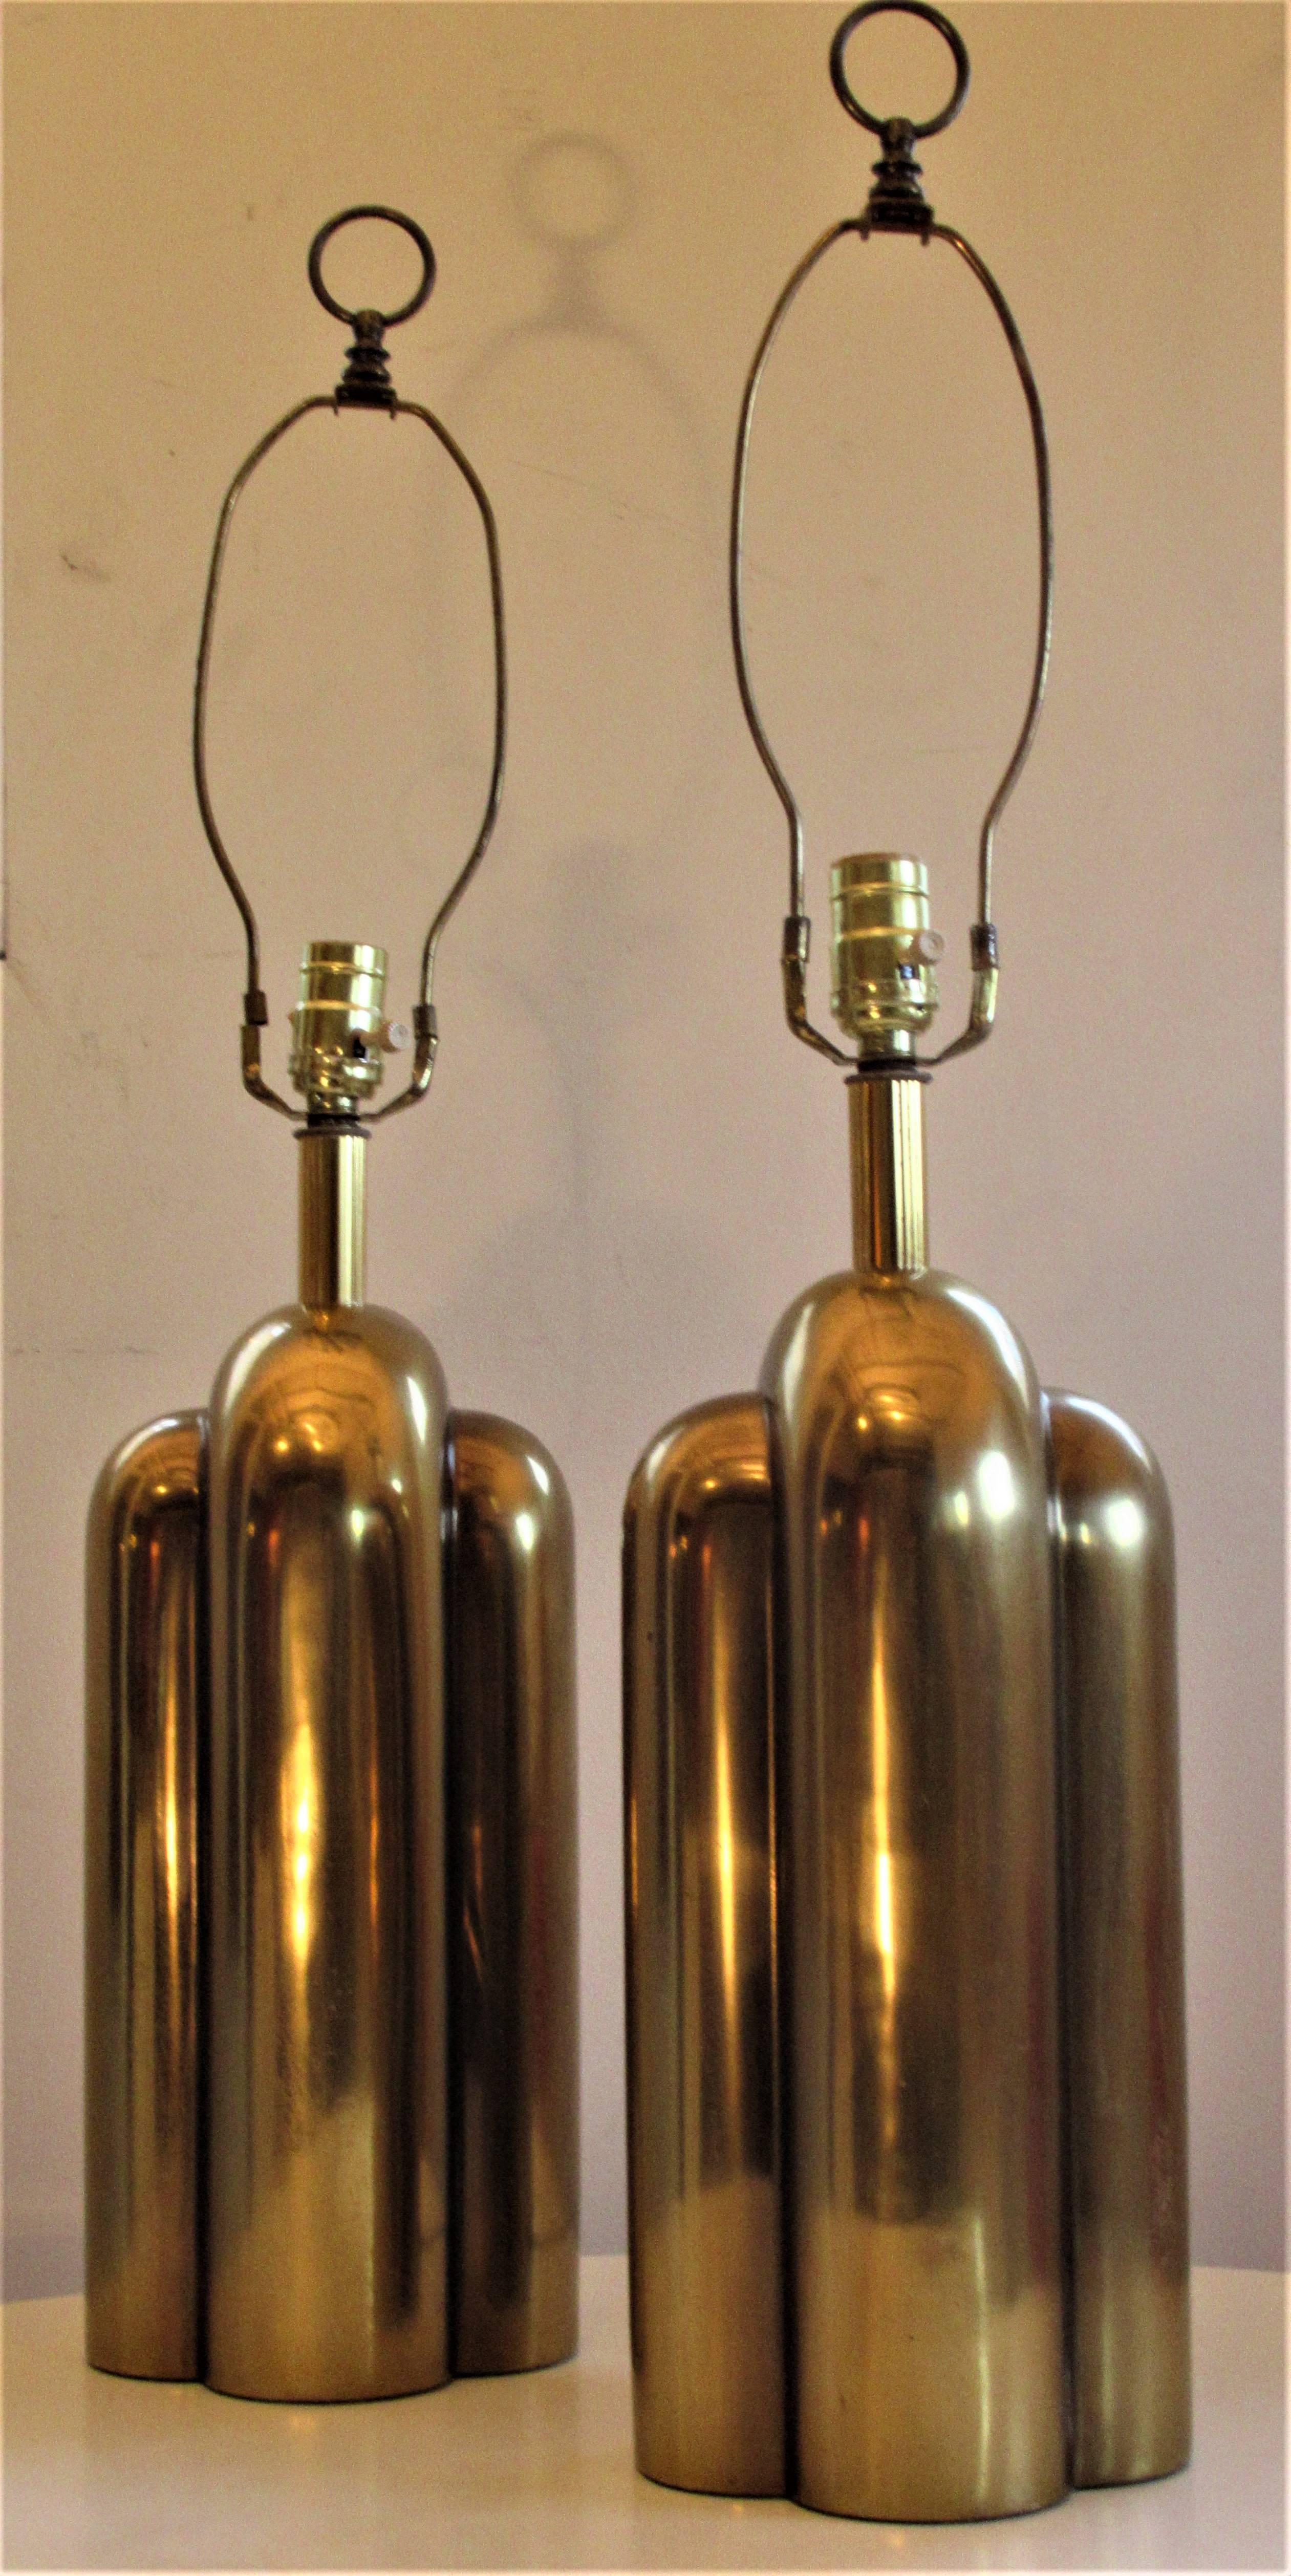 American Art Deco Style Brass Lamps by Westwood Industries